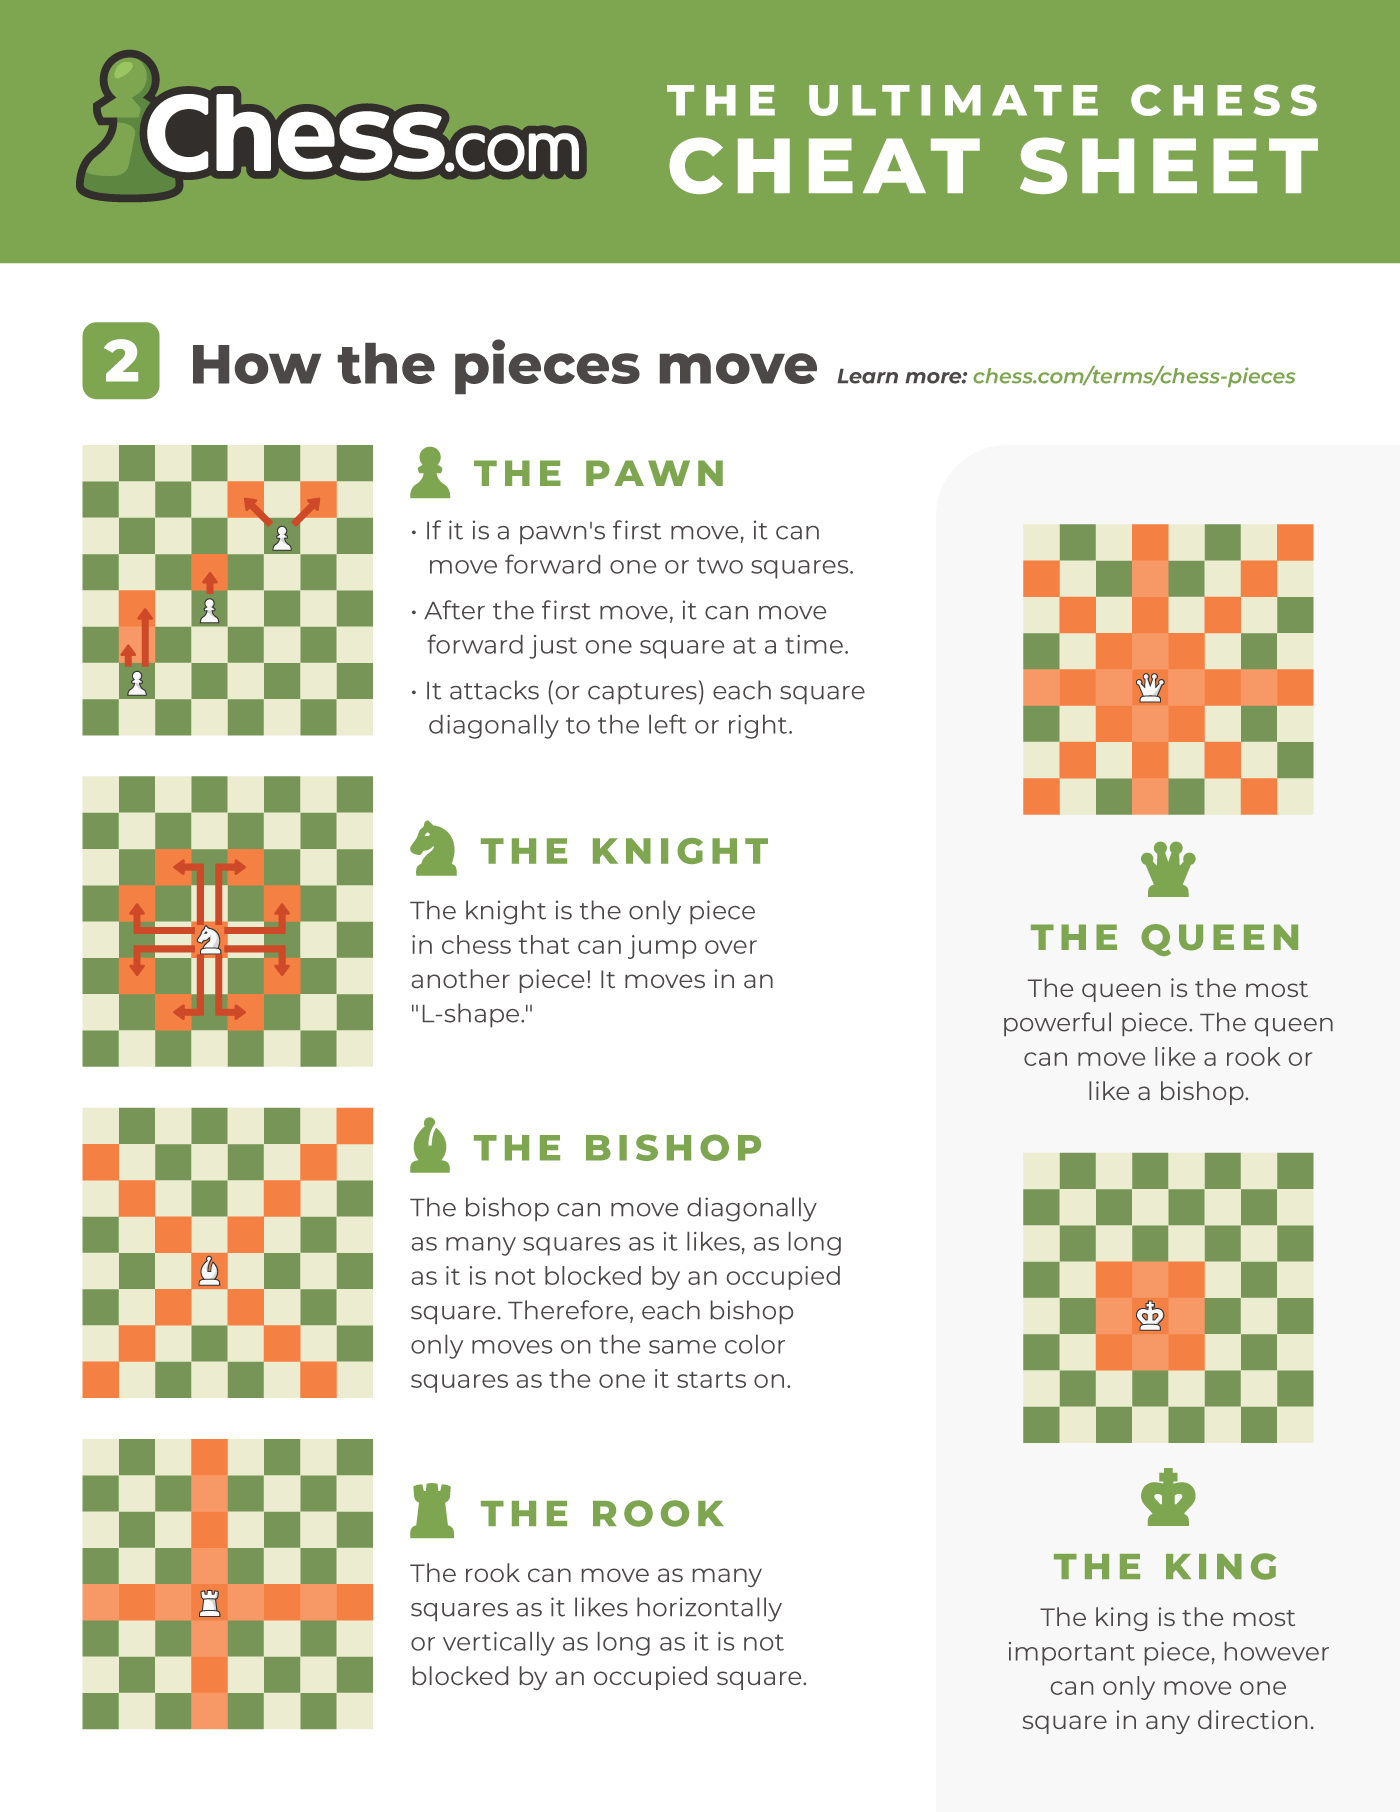 Chess Cheat Sheet Images & PDFs (Free to Download)